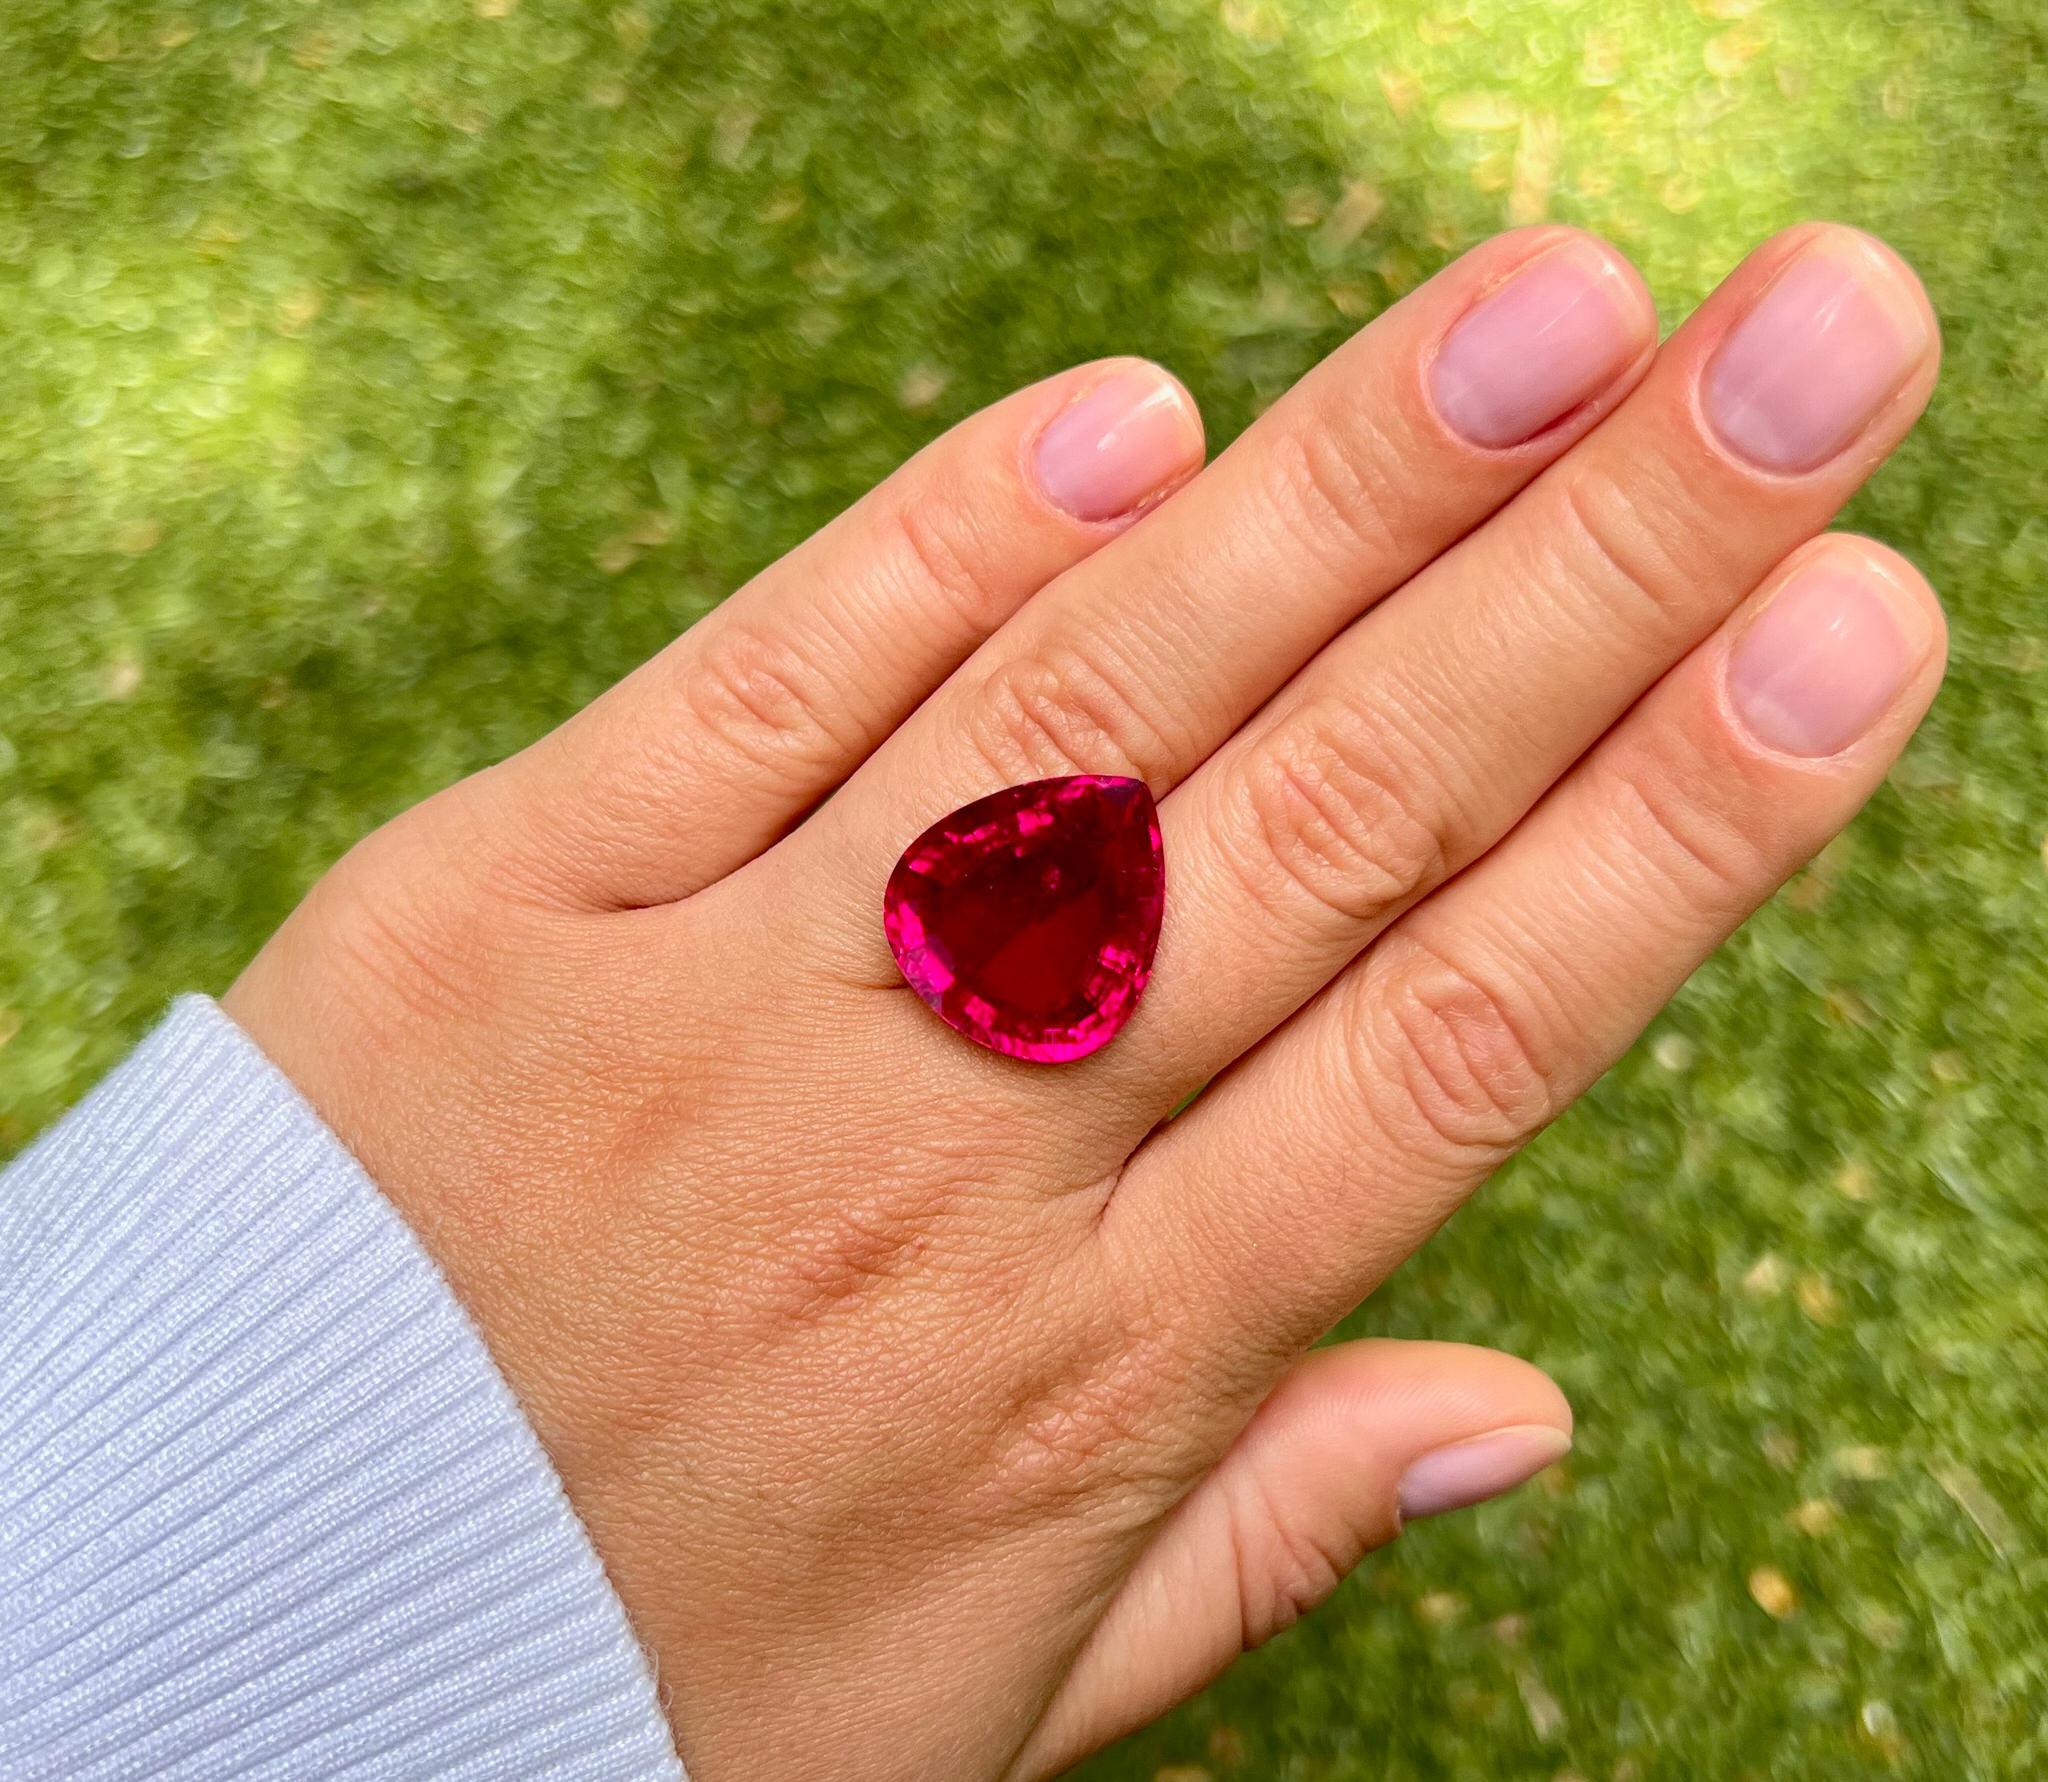 It comes with the GIA Certificate
Natural Rubellite Tourmaline
Carat Weight: 23.28 Carat
Color: Purple-Red
Cut: Pear
Measurements: 21.10 x 18.85 x 9.46 mm
It can be used for a custom jewelry piece, contact us for the details